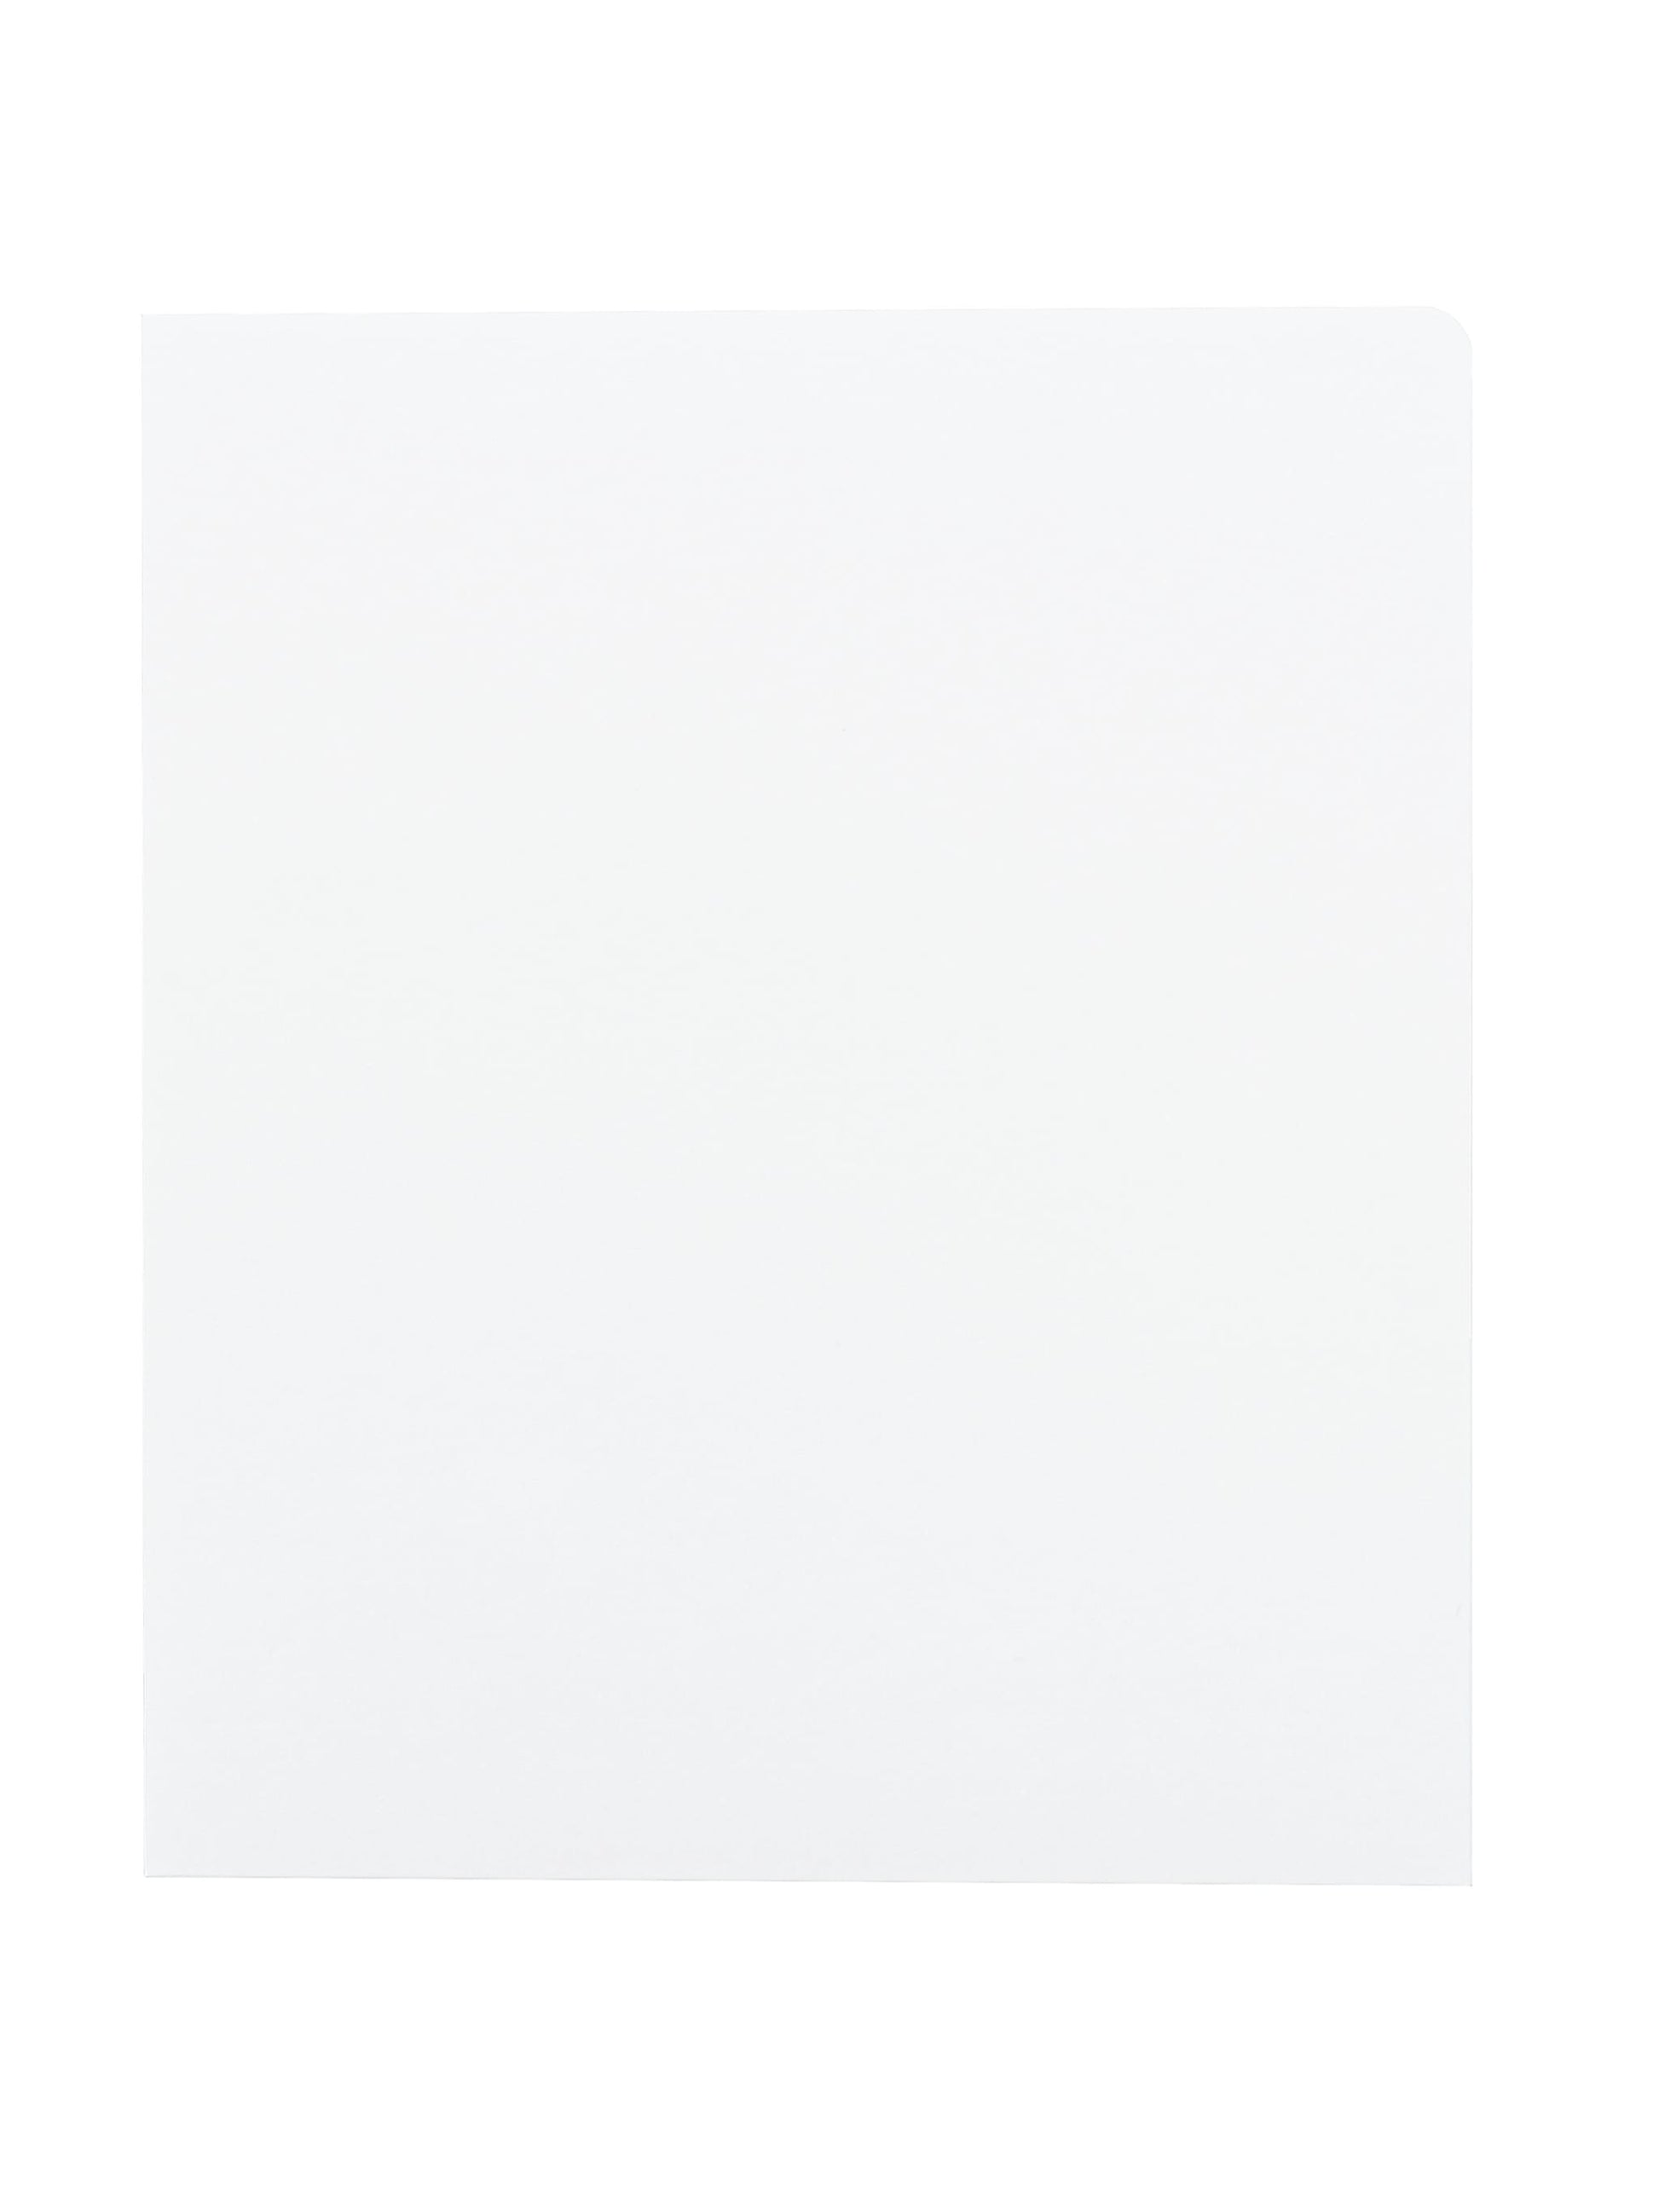 High Gloss Two-Pocket Folders, White Color, Letter Size, 30086486878839